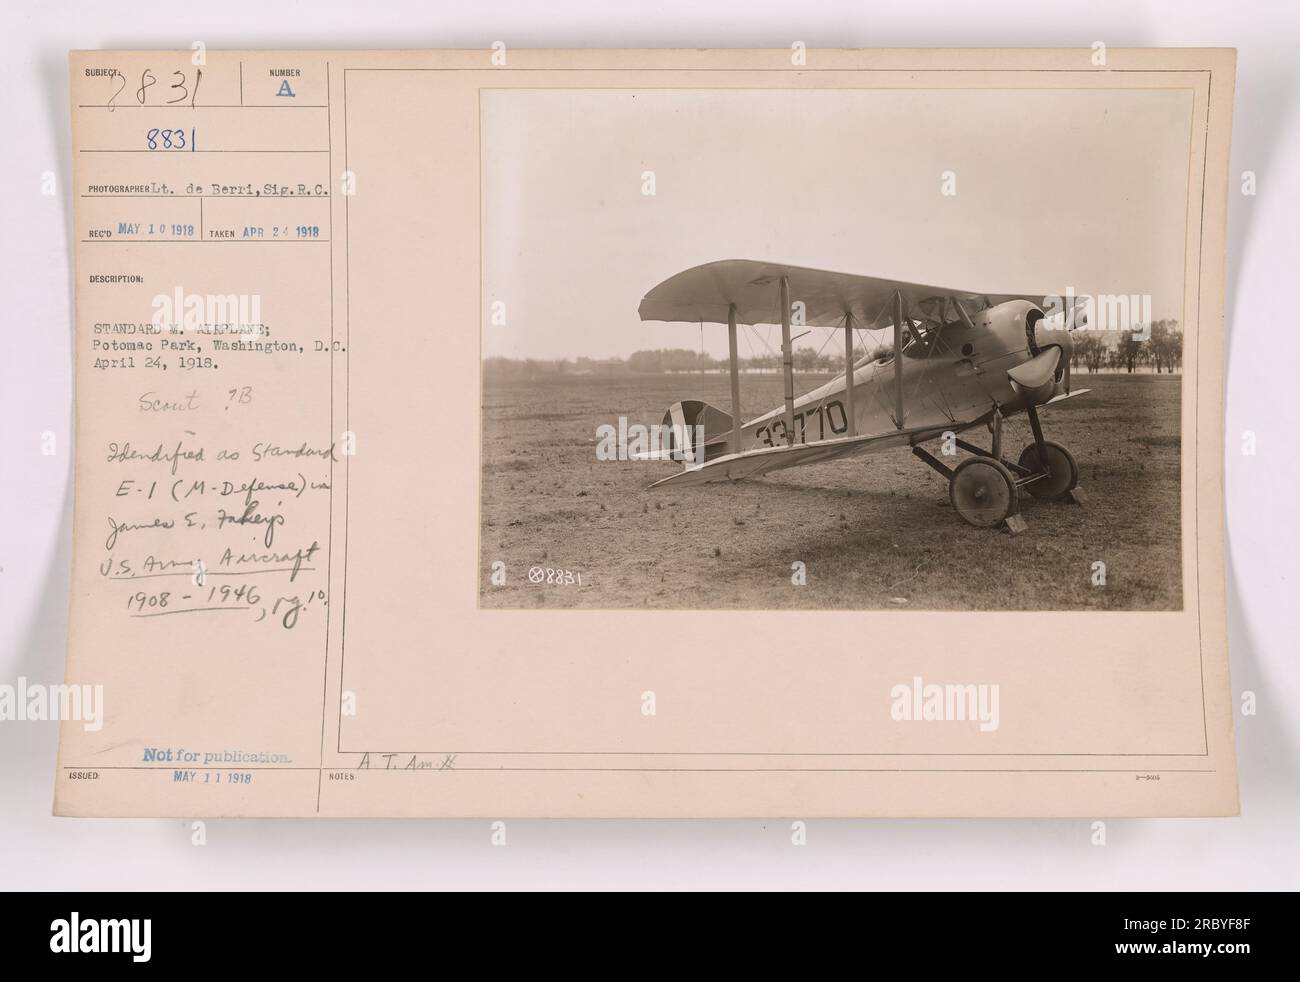 Image caption: Standard M Airplane at Potomac Park, Washington, DC in April 24, 1918. Scout 18. Identified as Standard E-1 (M-Defense). Photgraphed by Lt. de Berri, Sig. R.C. A. Image from Collection 111-SC-8831, Photographs of American Military Activities during World War One. Stock Photo